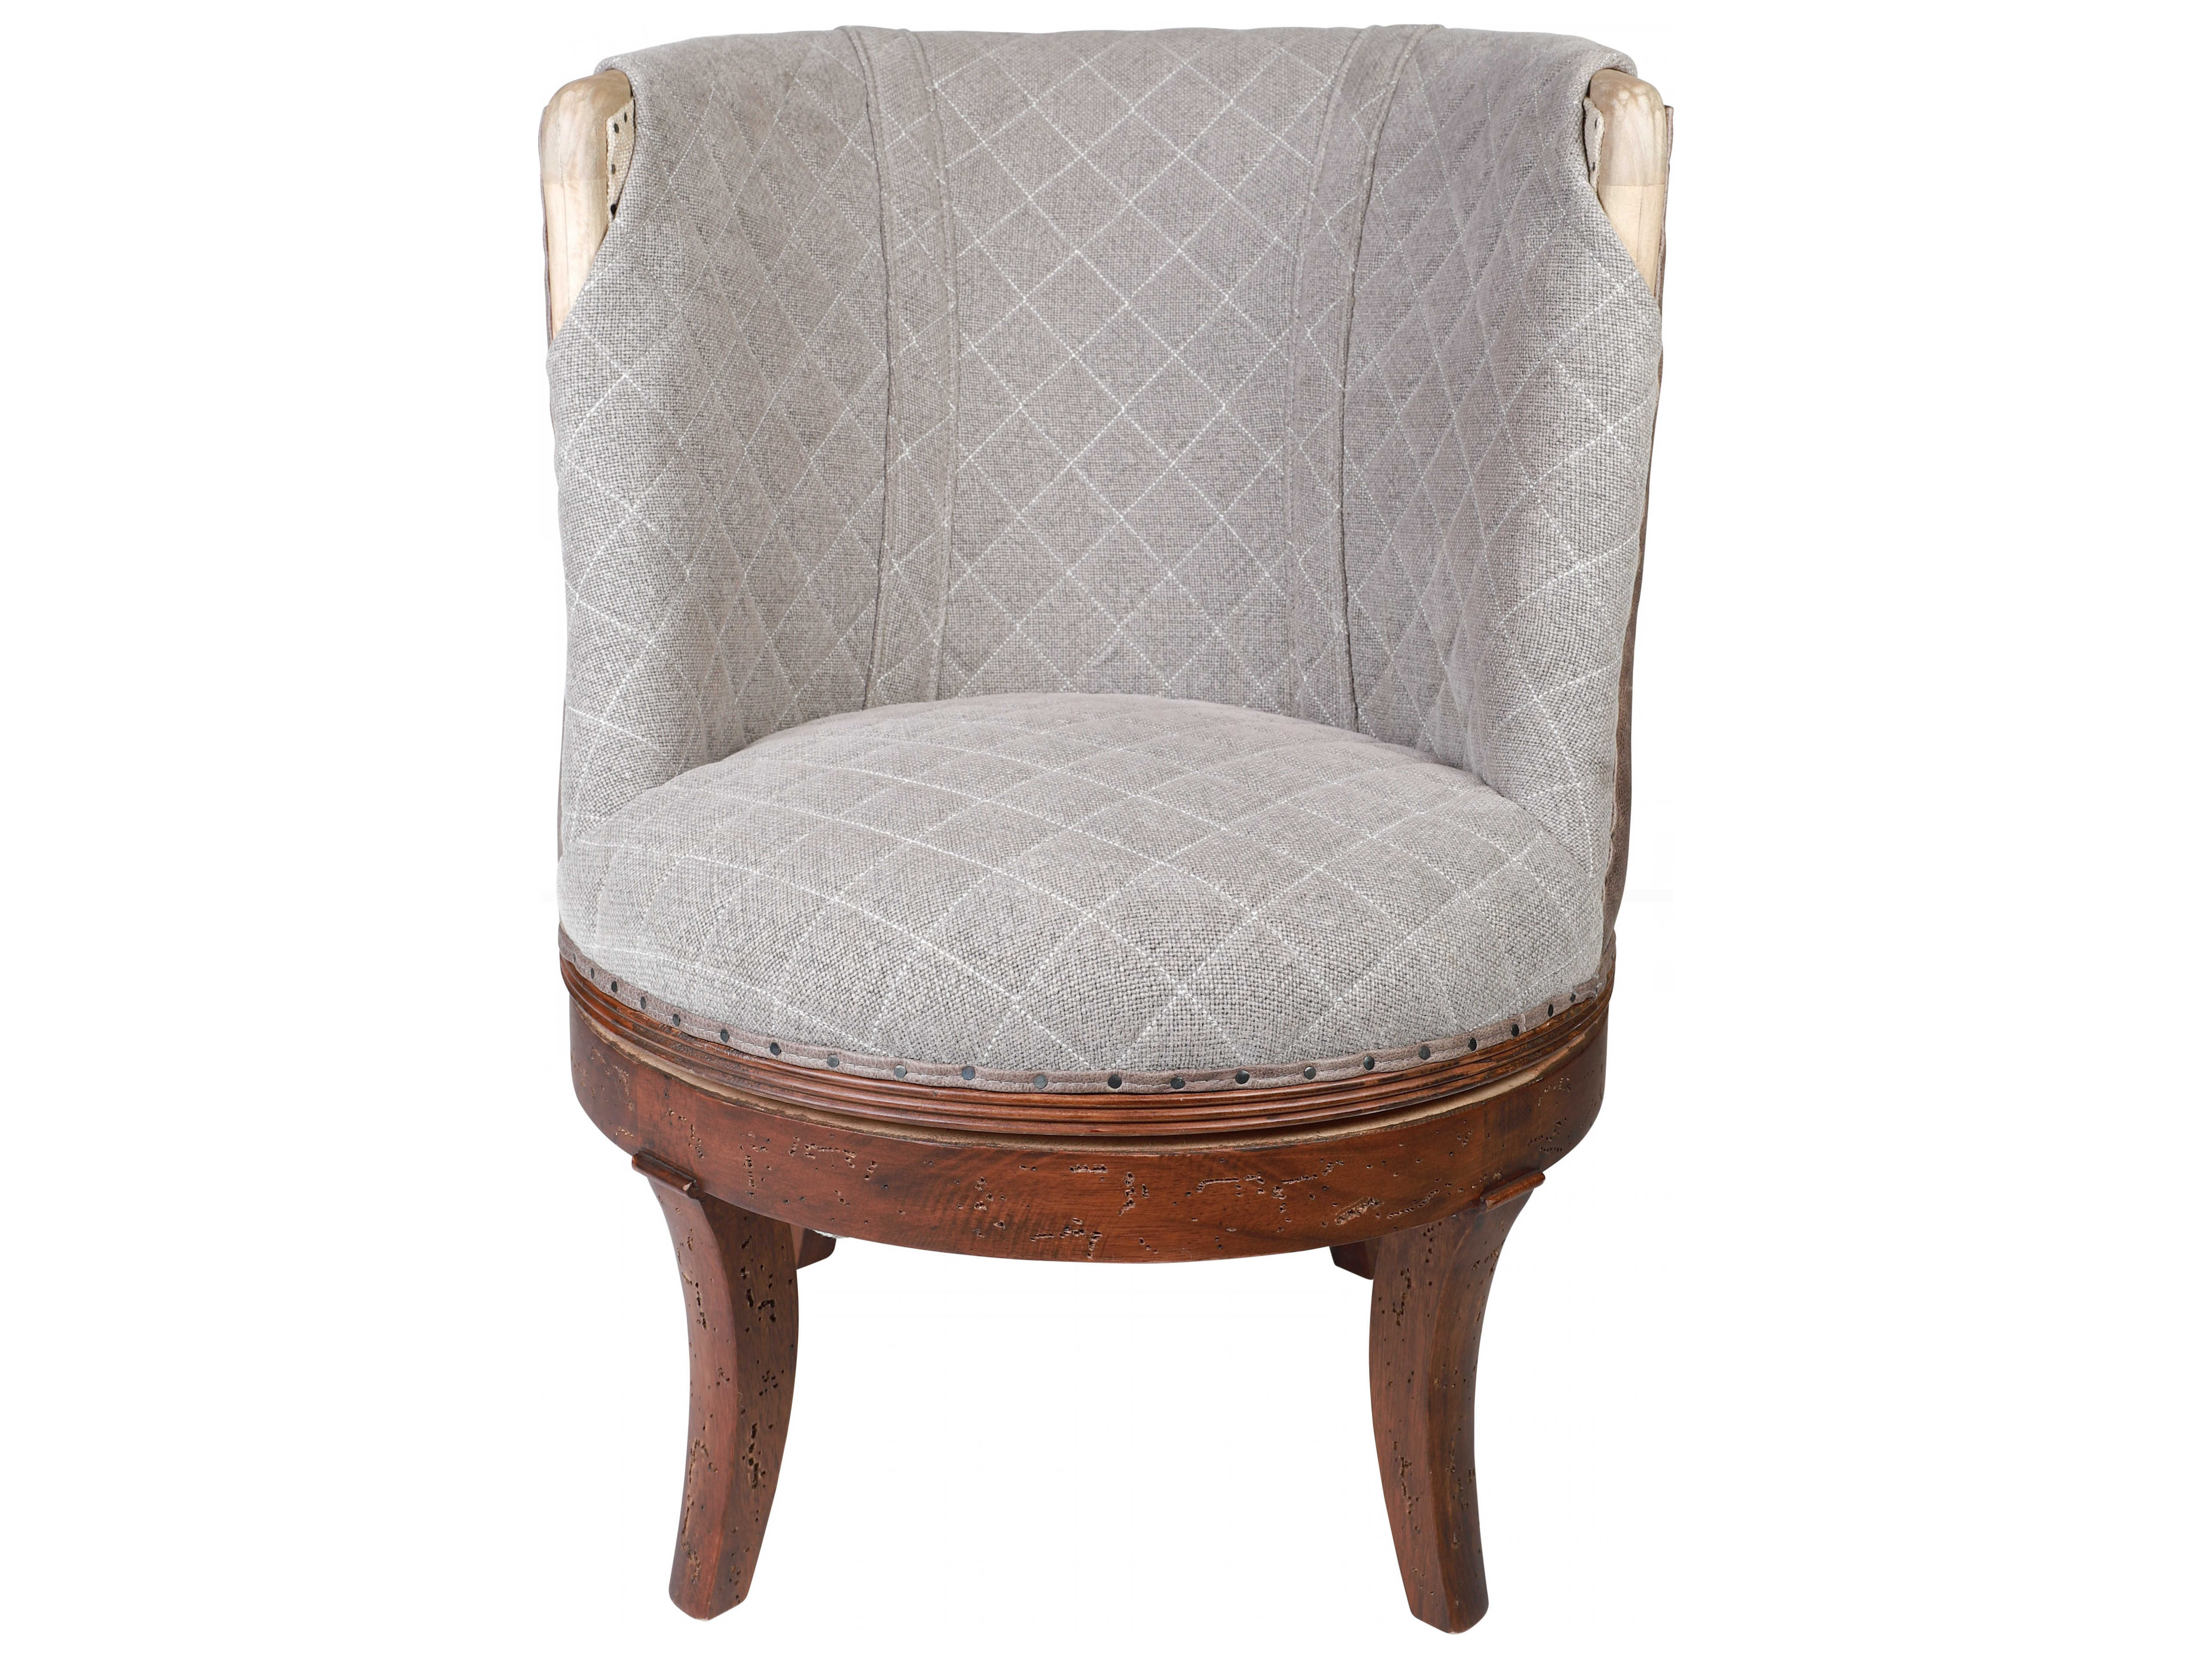 Aidan Gray Distressed Rustic Wood Accent Chair Diva100